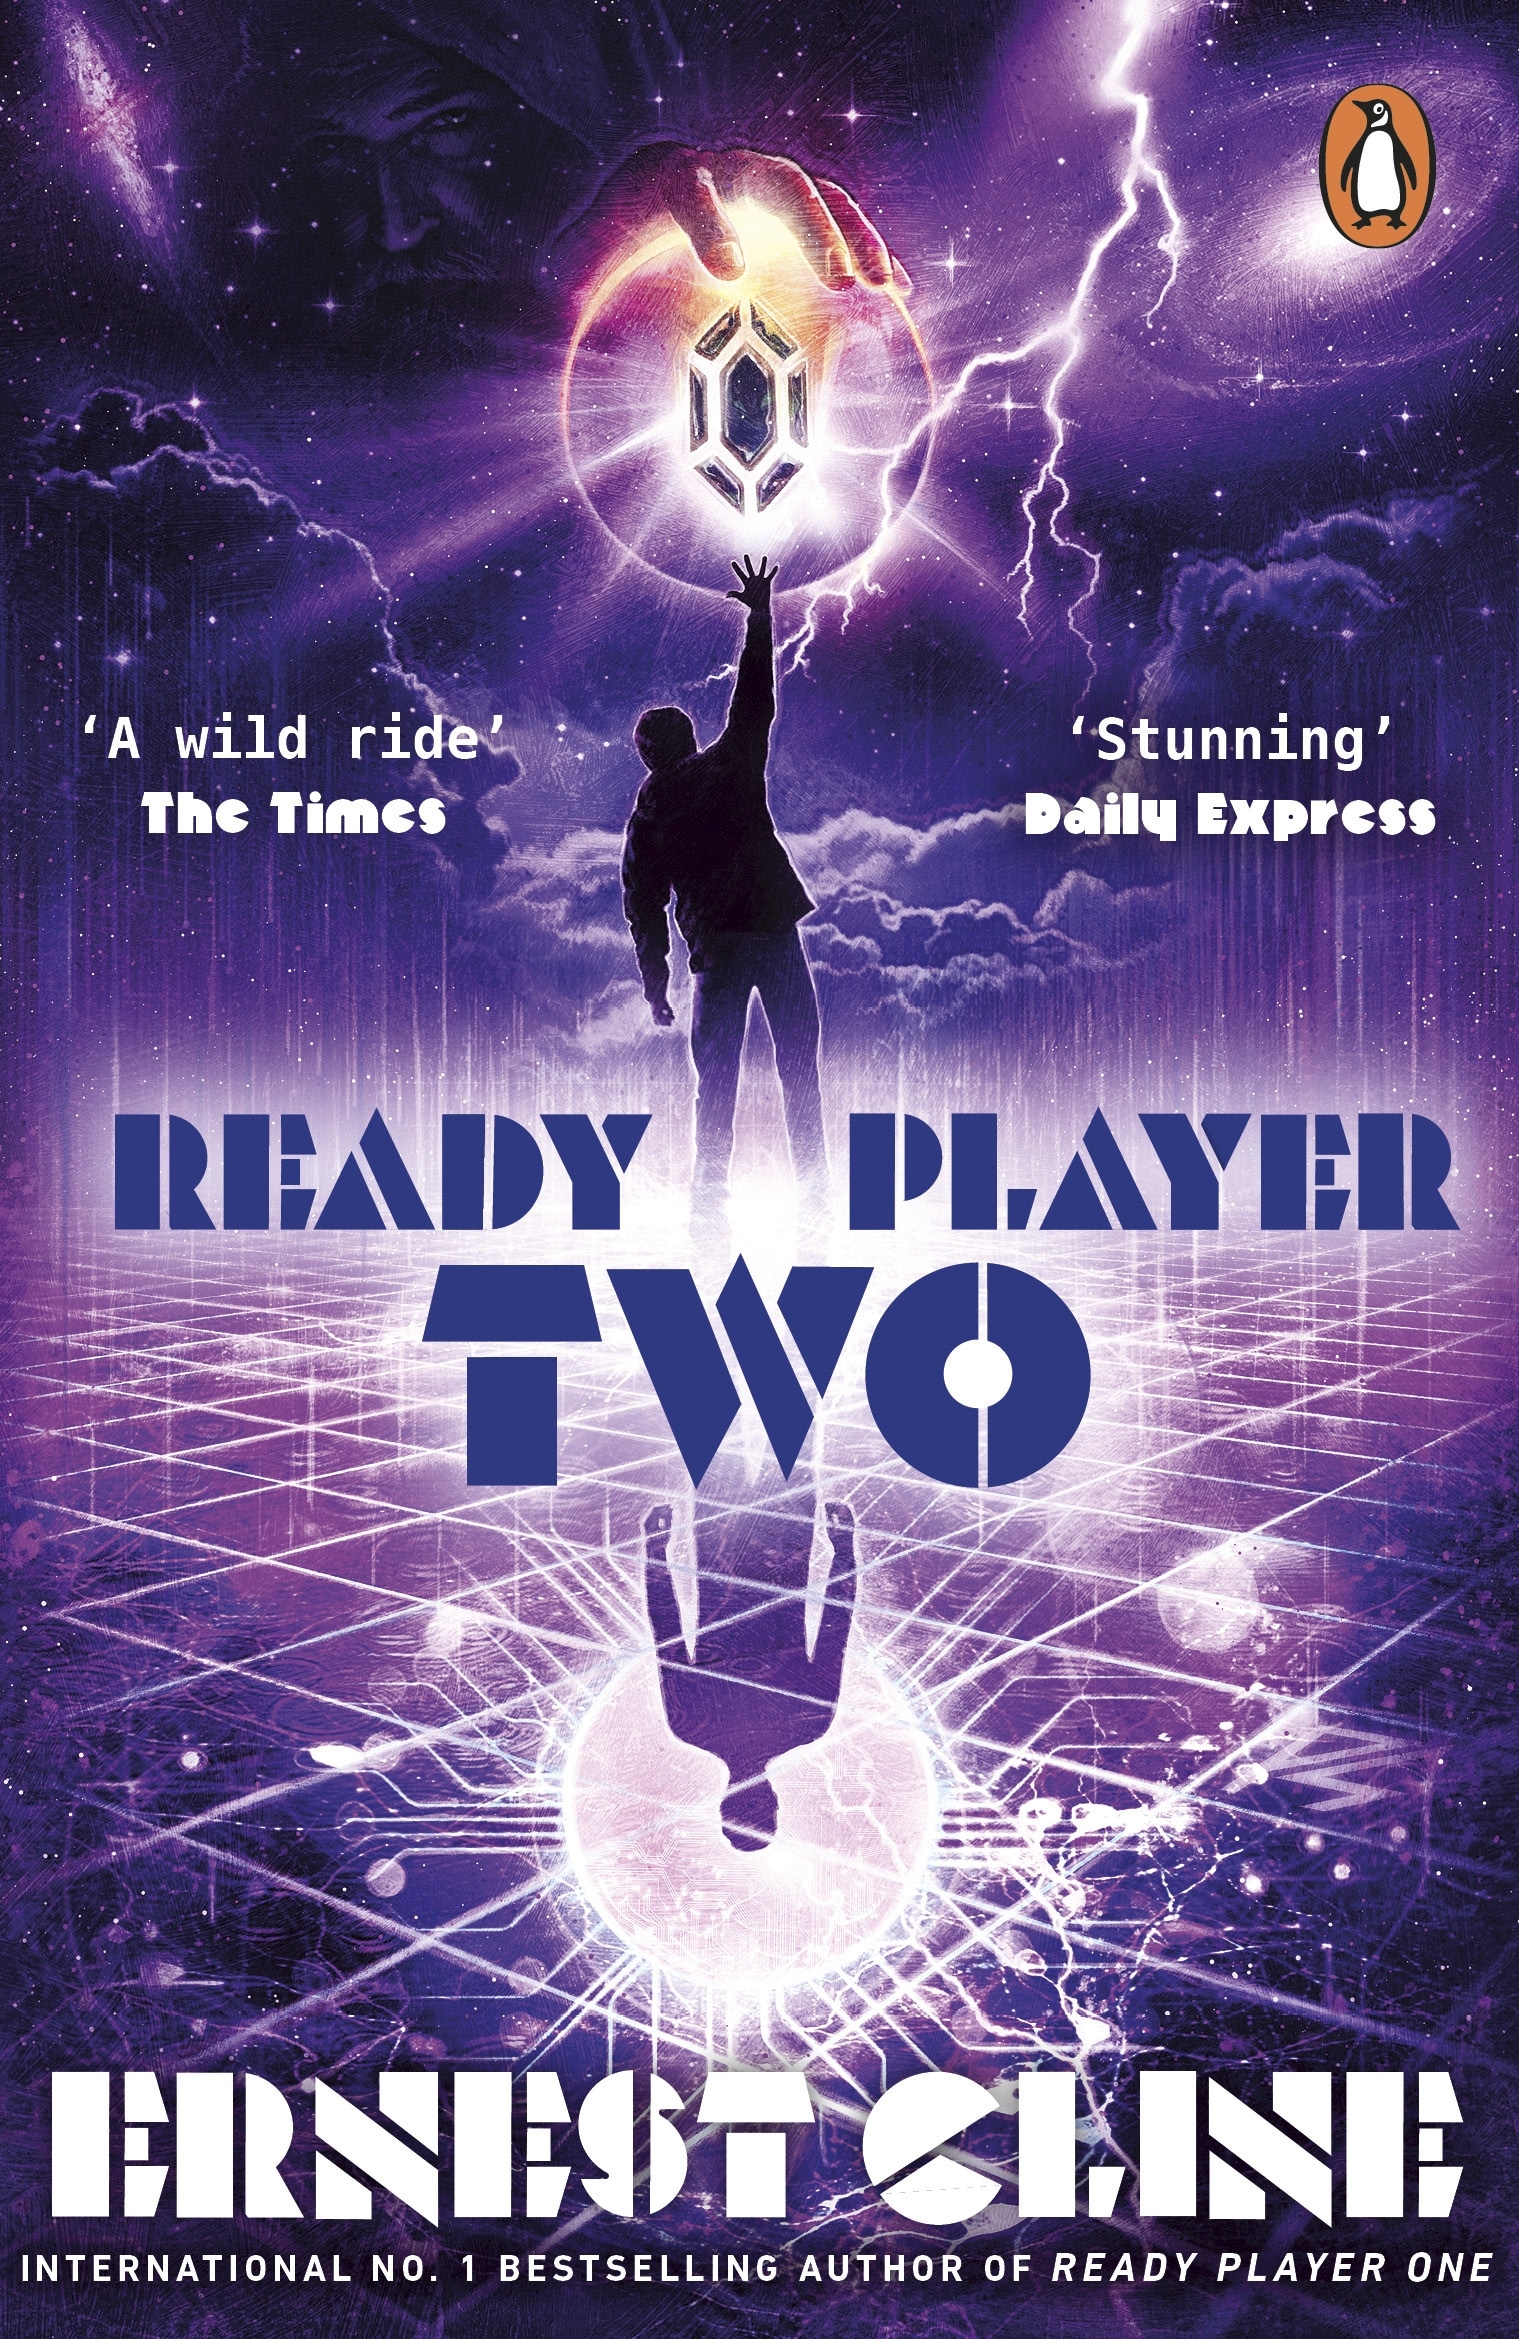 Book “Ready Player Two” by Ernest Cline — November 9, 2021